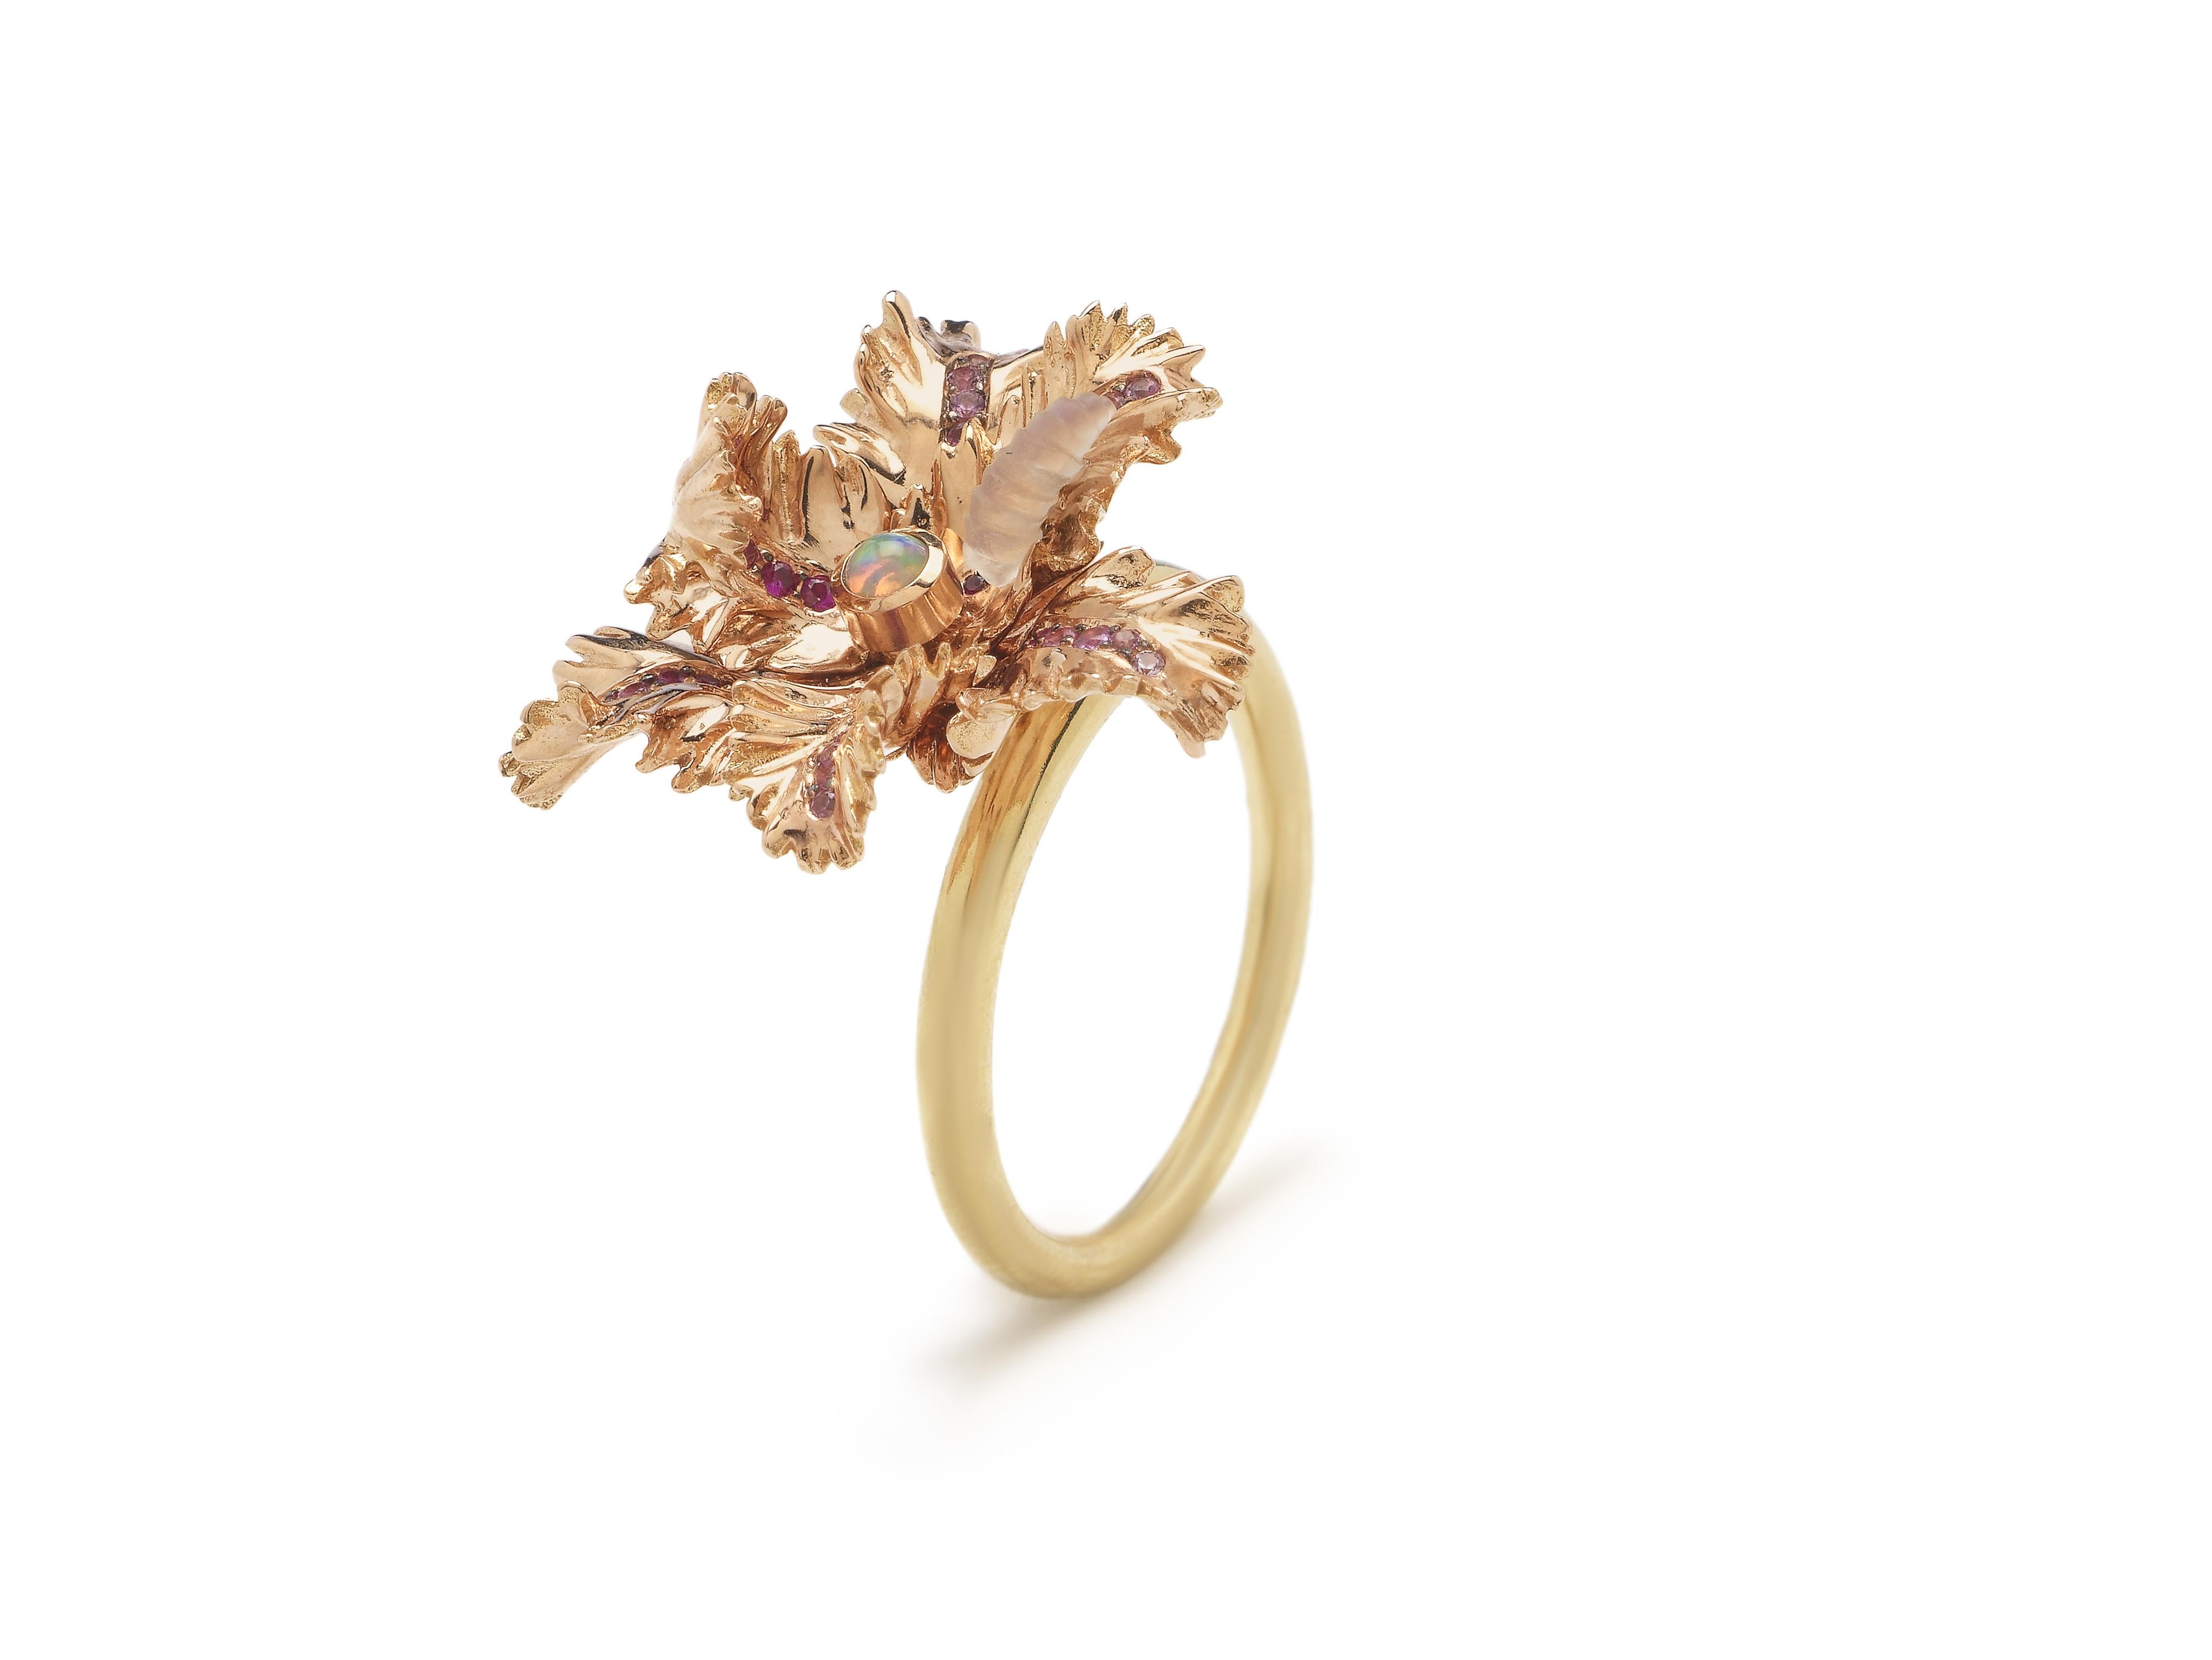 In the Small Tulip Ring Bibi captures the delicate form of a Parrot Tulip in a precious, sculptural ring. This statement cocktail ring is designed with 18k rose gold petals and an 18k yellow gold shank, with the shank fashioned as the tulip’s stem,